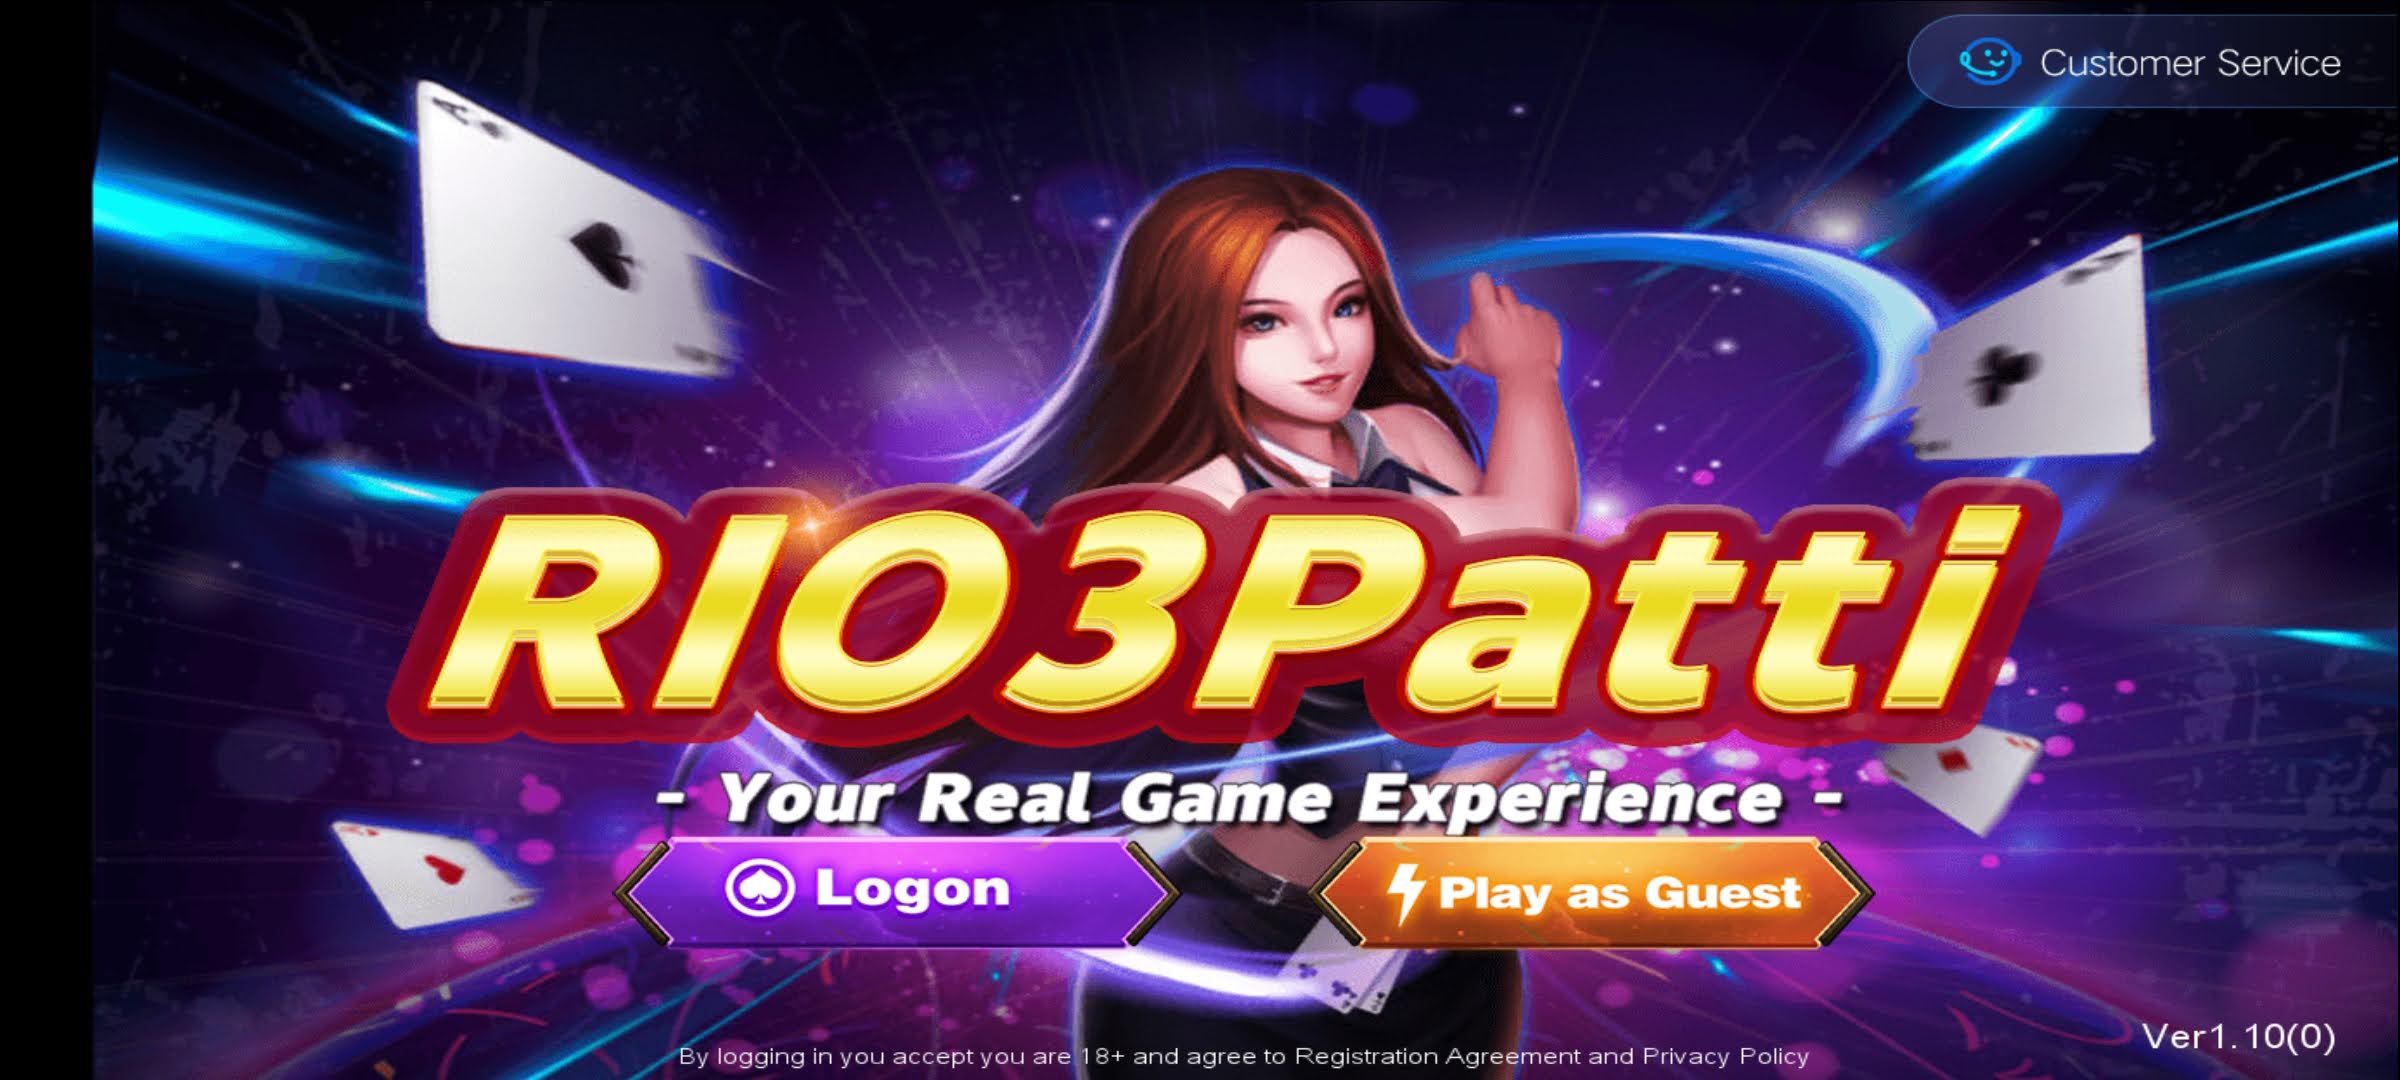 Rio 3Patti APK Download | Sign up Rs.50 | Min. Withdraw Rs.200